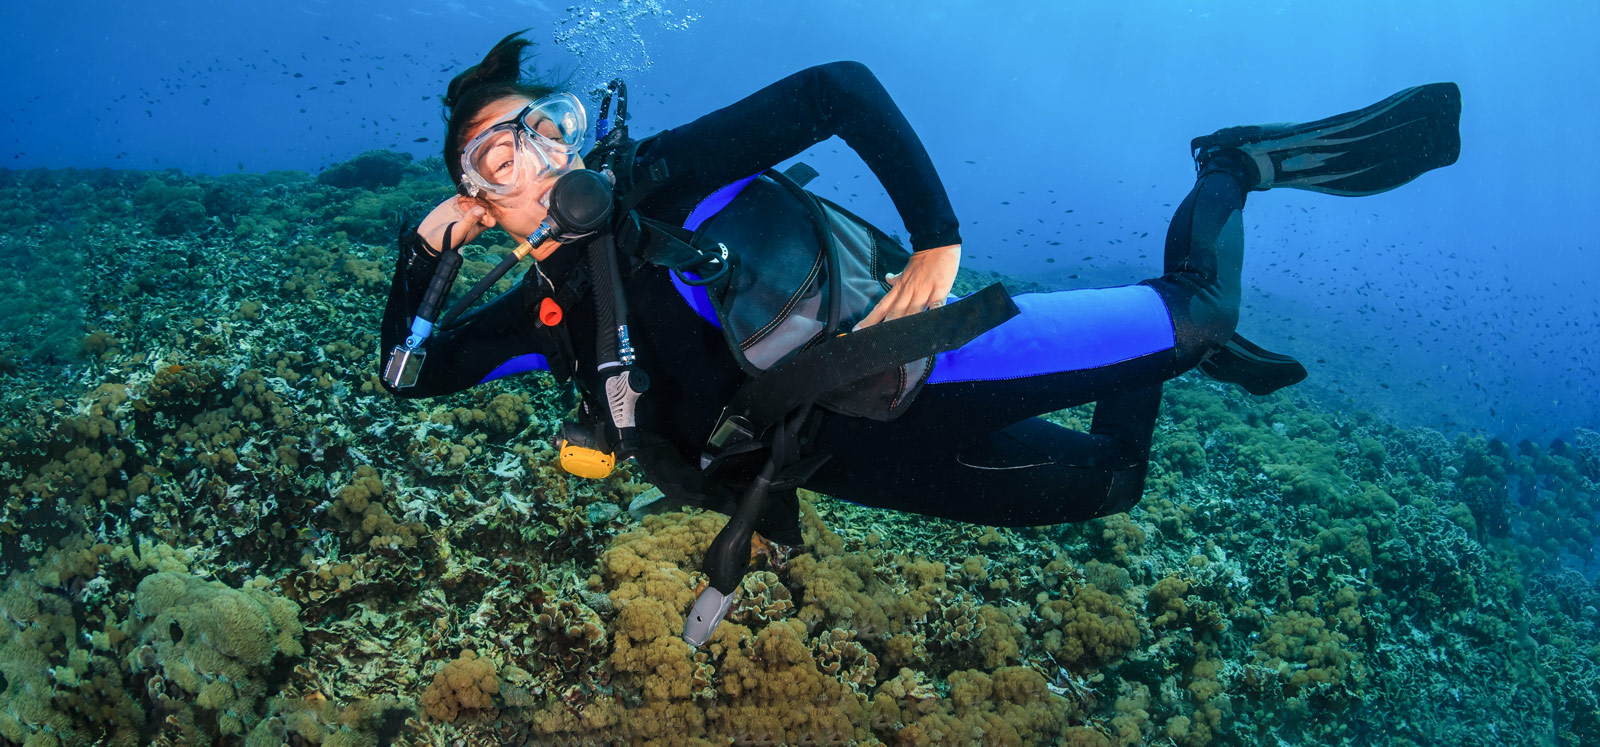 Women's dive travel - where to go and what to know